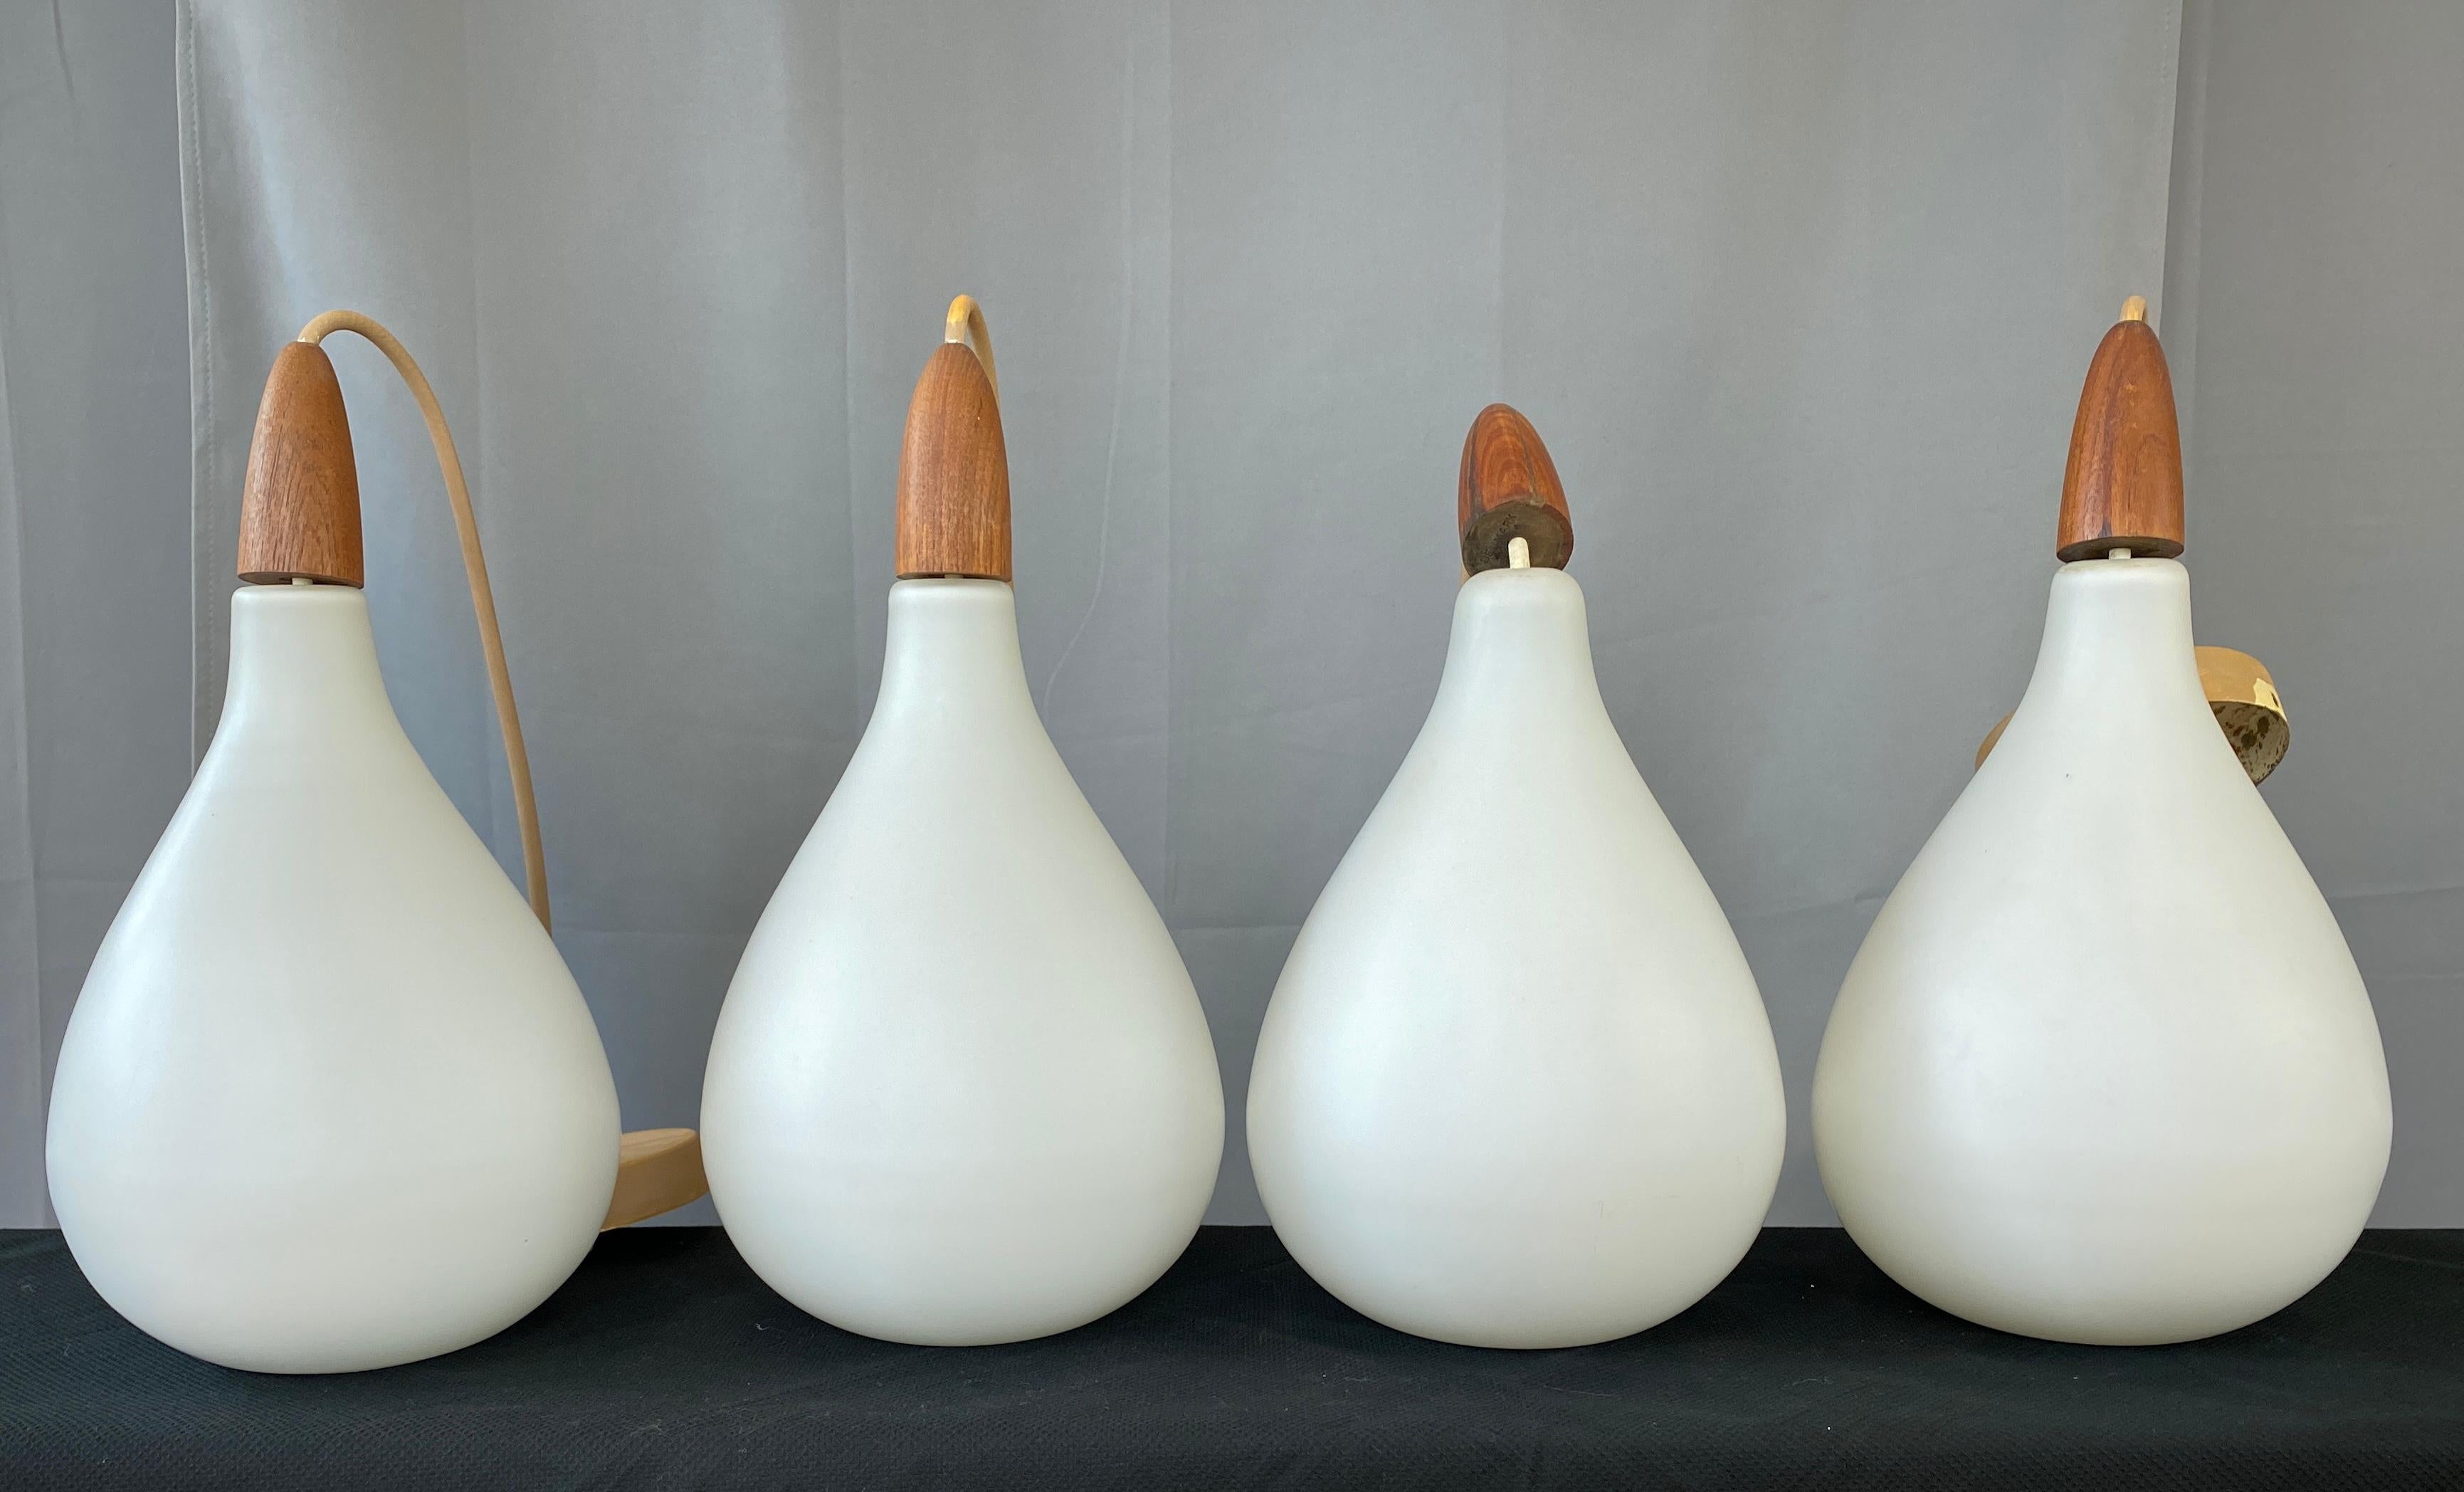 A nice set of 4 Danish white cased glass pendants with each one topped off with a solid Teak finial.
The finial's have Denmark stamped on their underside. We are dating these from the 1960s.